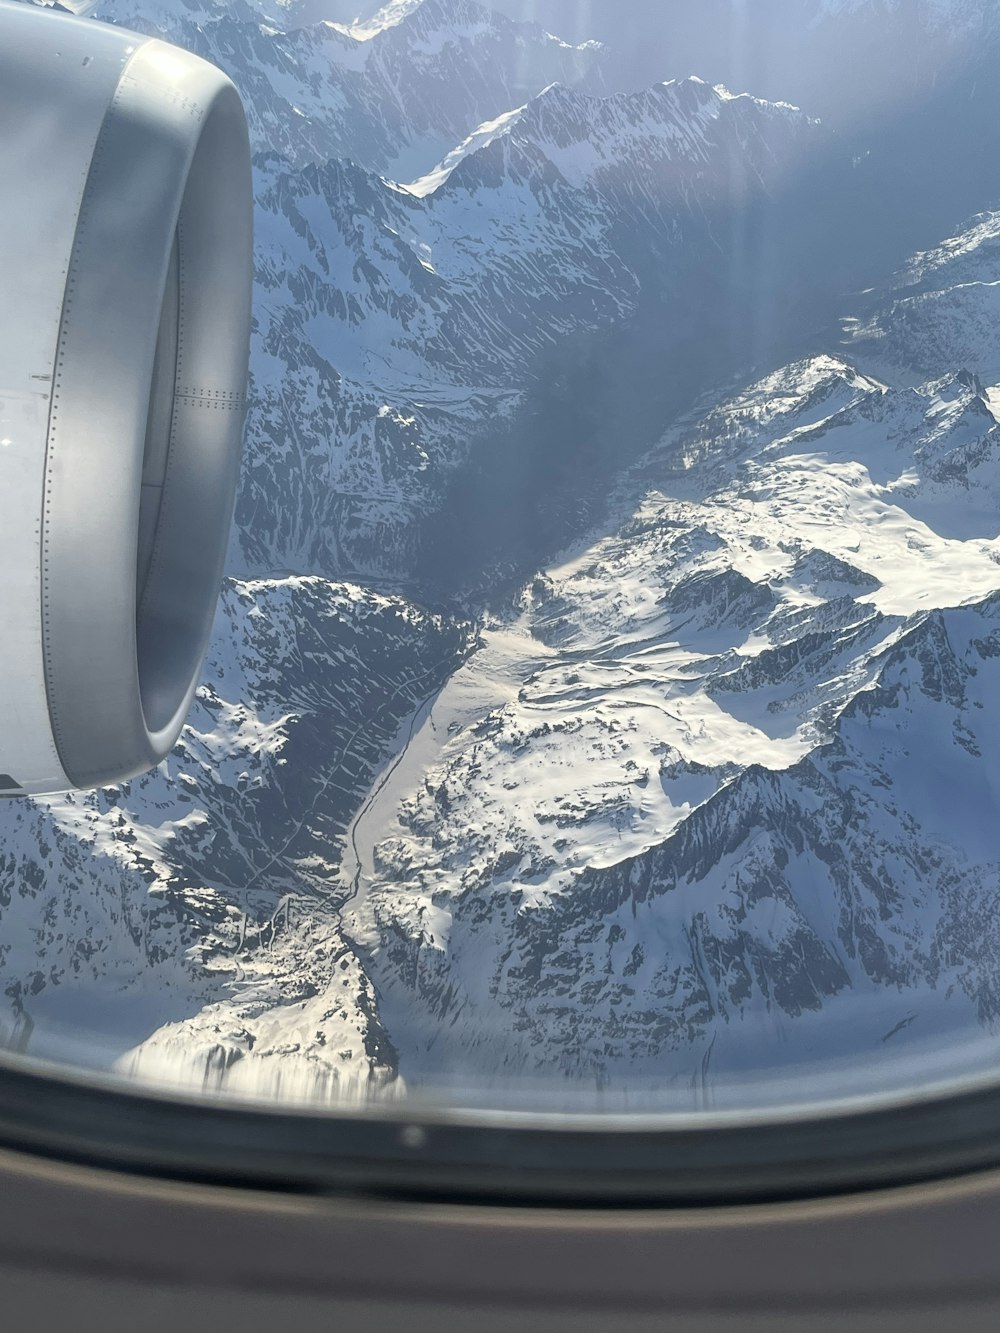 a view of a snowy mountain range from an airplane window